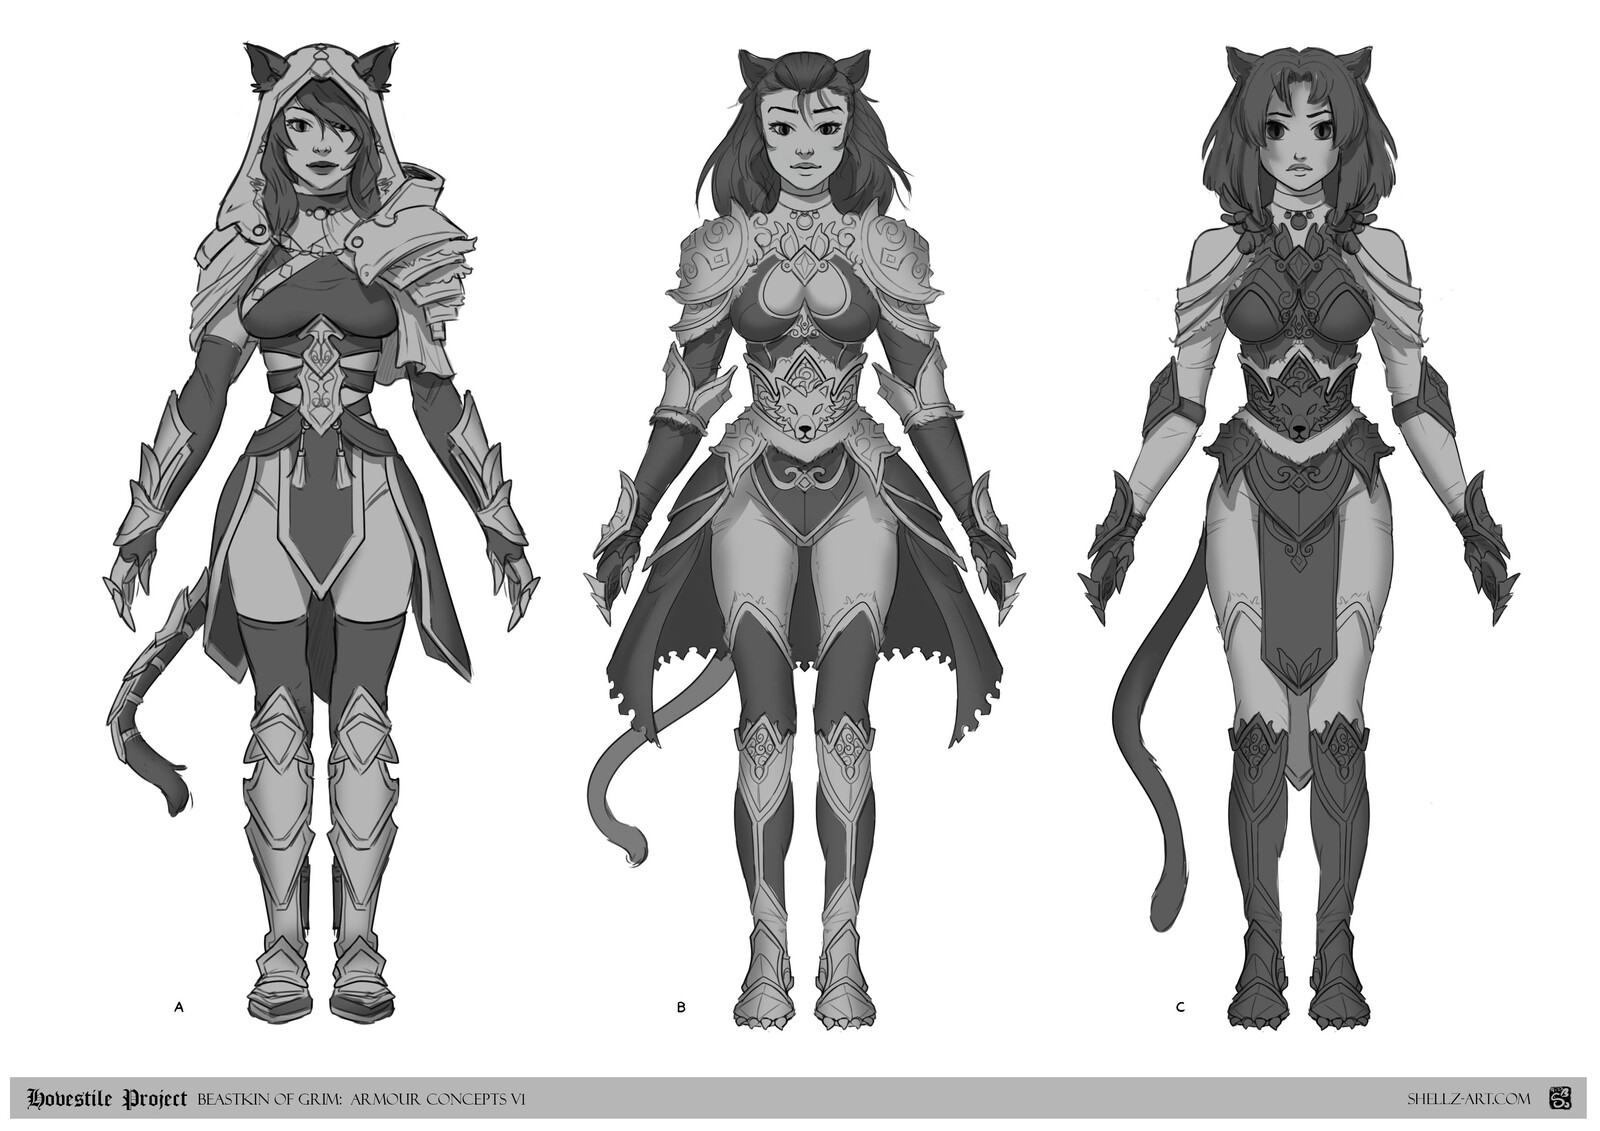 Hovestile Project: Character Concepts - Kirie